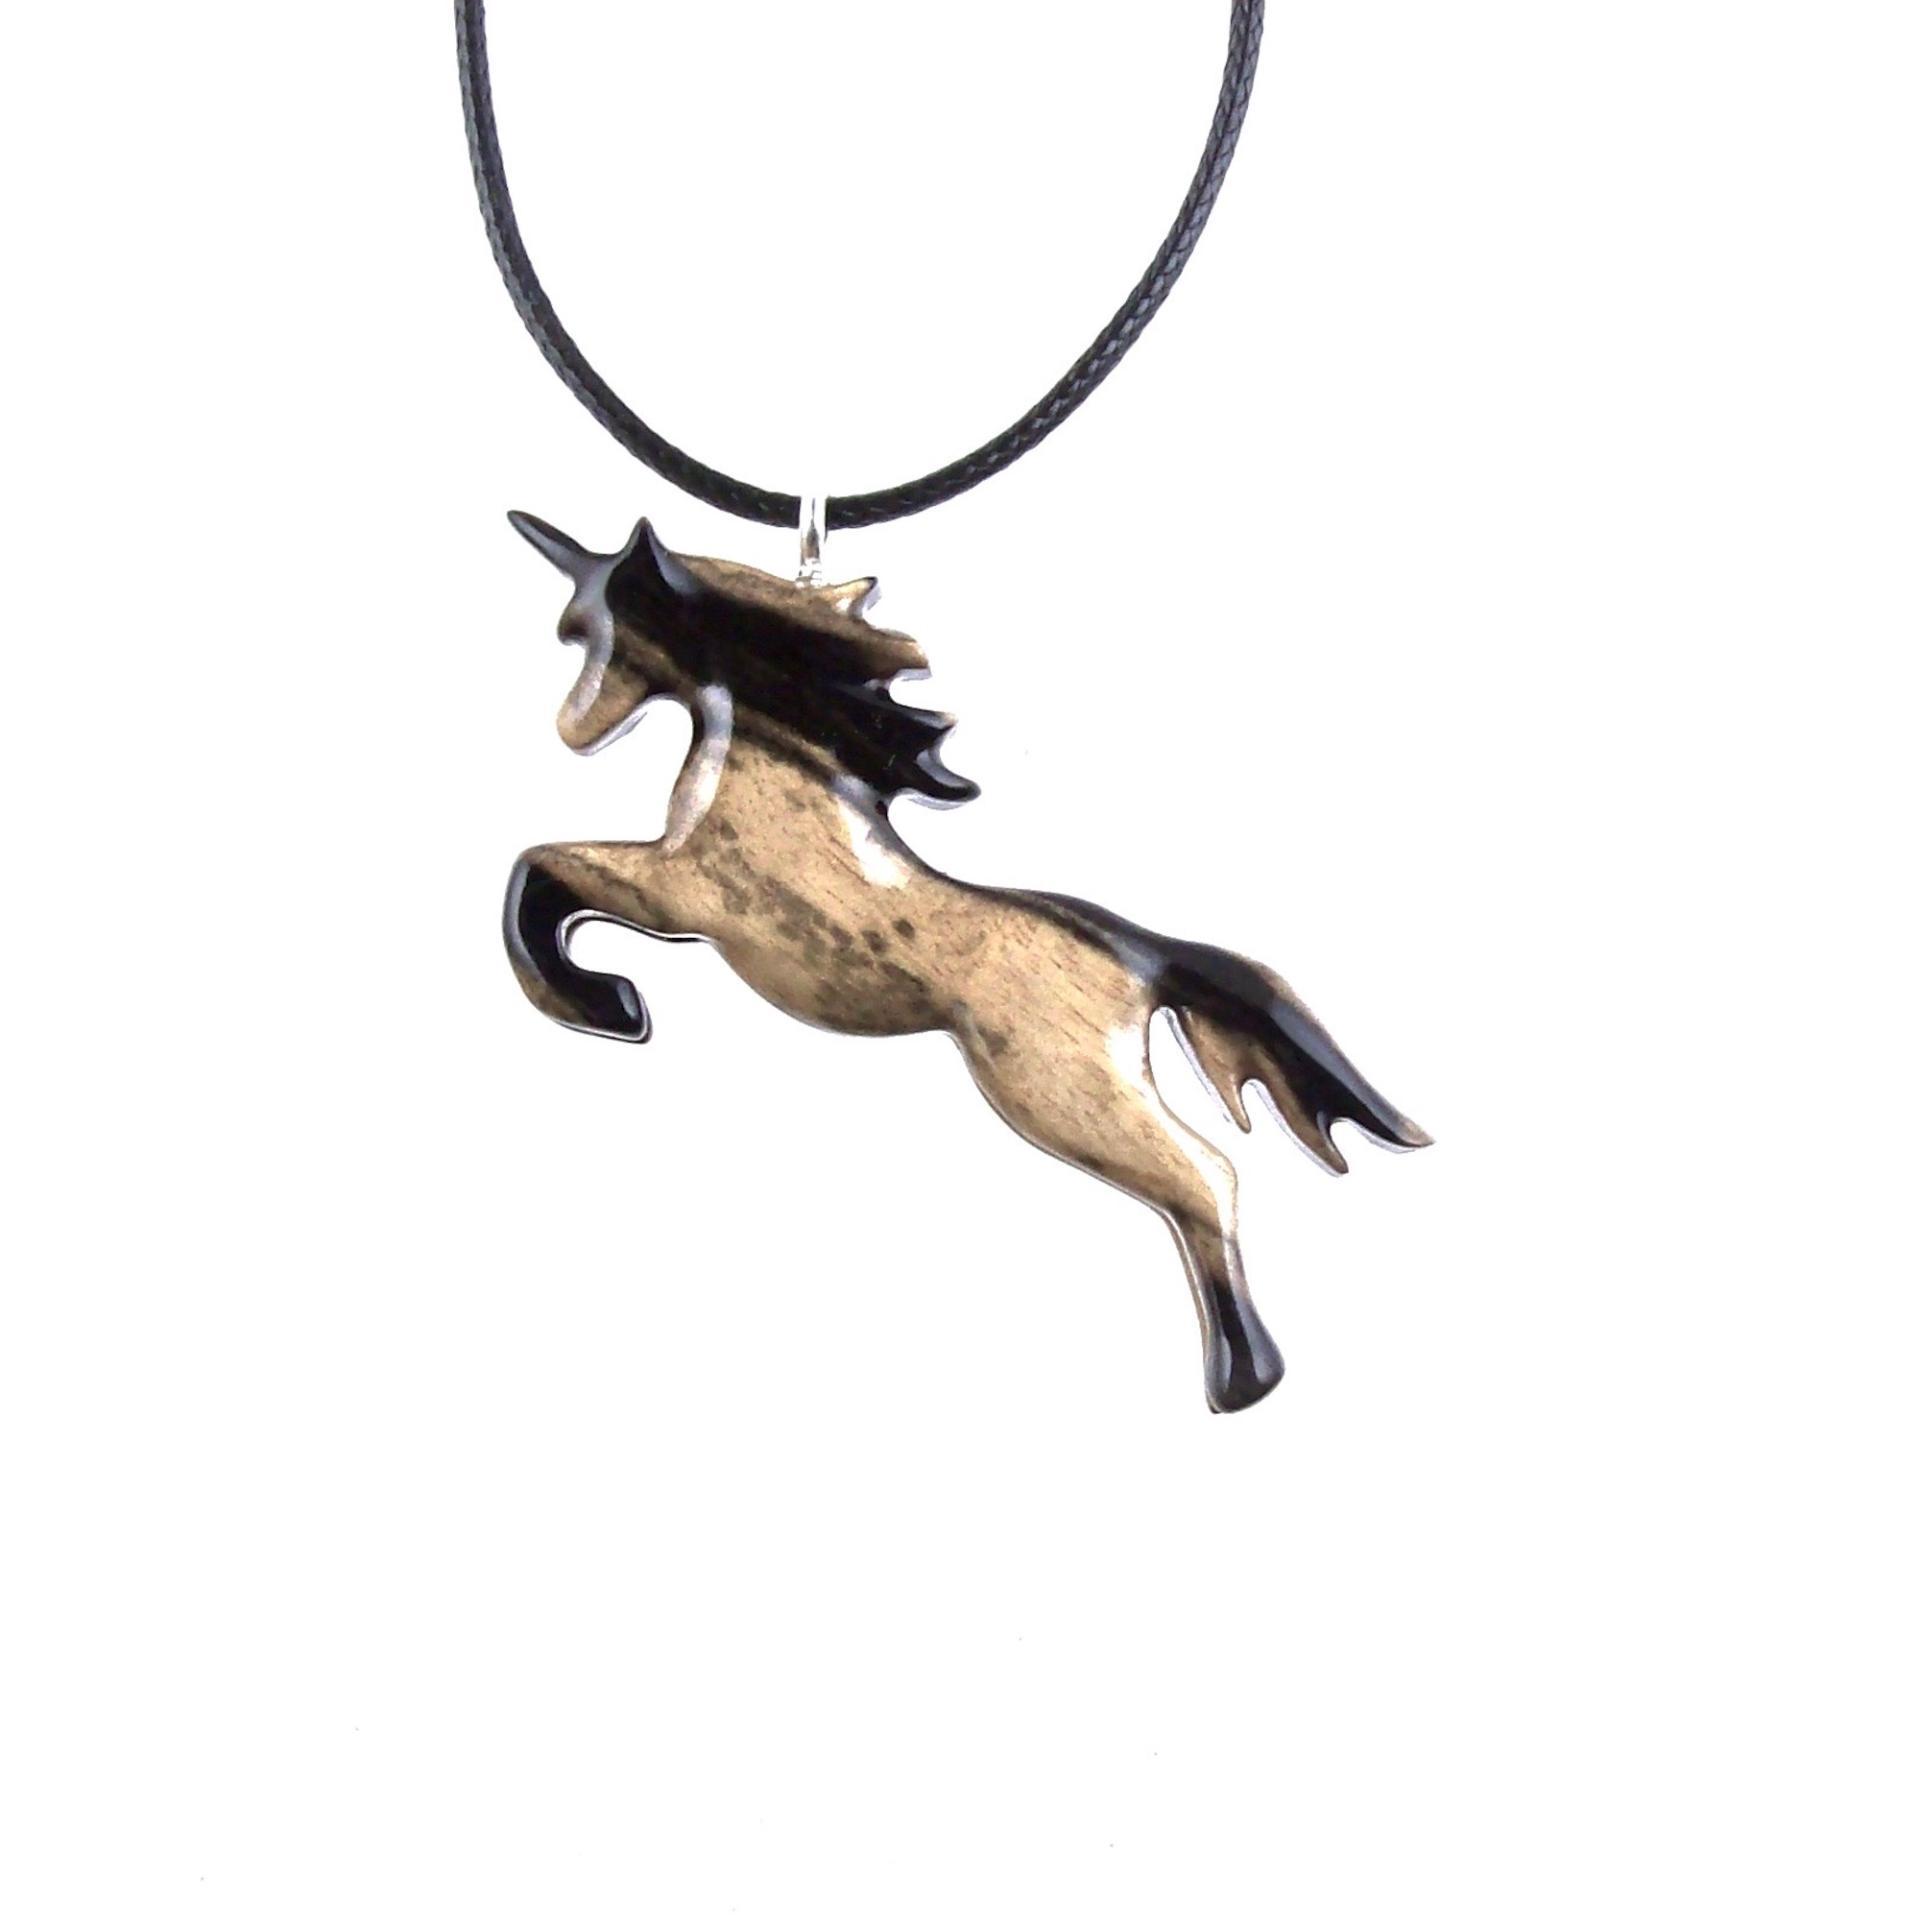 Unicorn Necklace, Hand Carved Wooden Unicorn Pendant, Fantasy Animal Wood Jewelry, One of a Kind Gift for Her